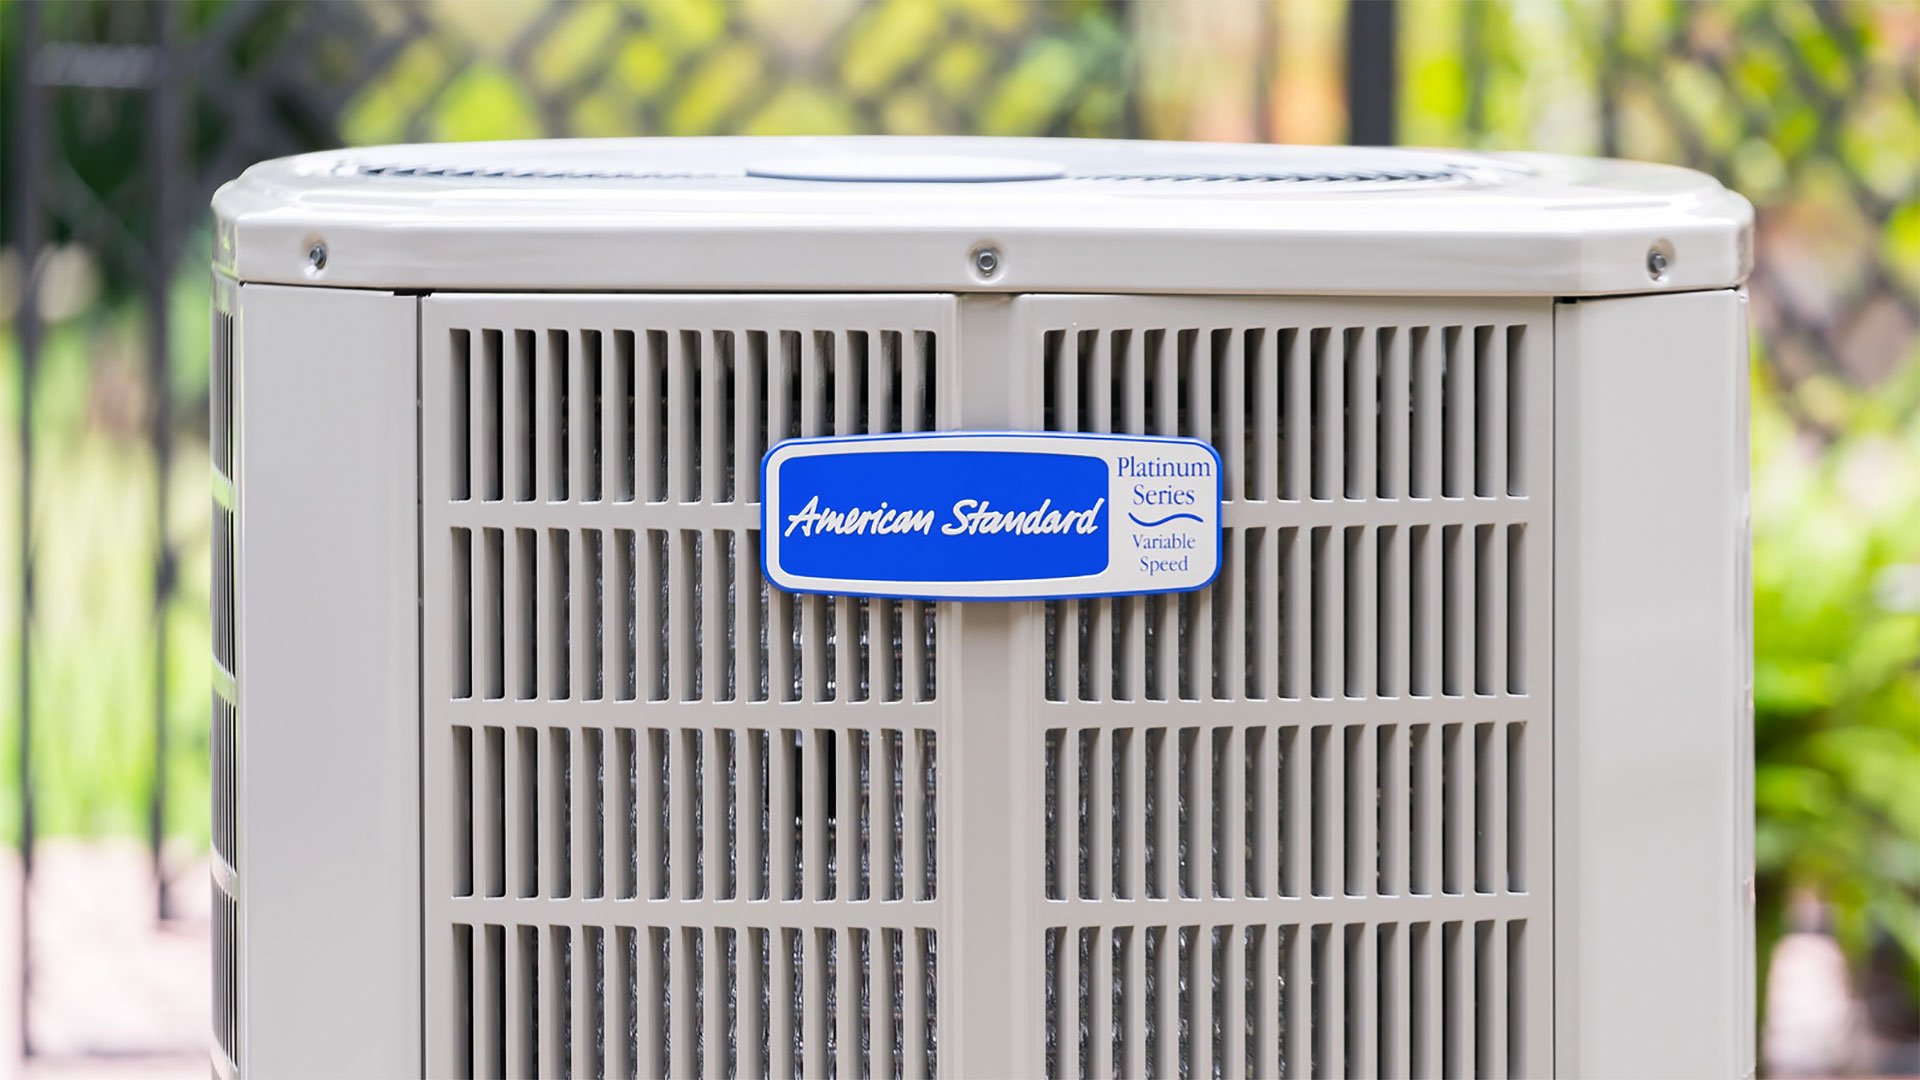 How to Troubleshoot and Repair Your American Standard Central AC Unit